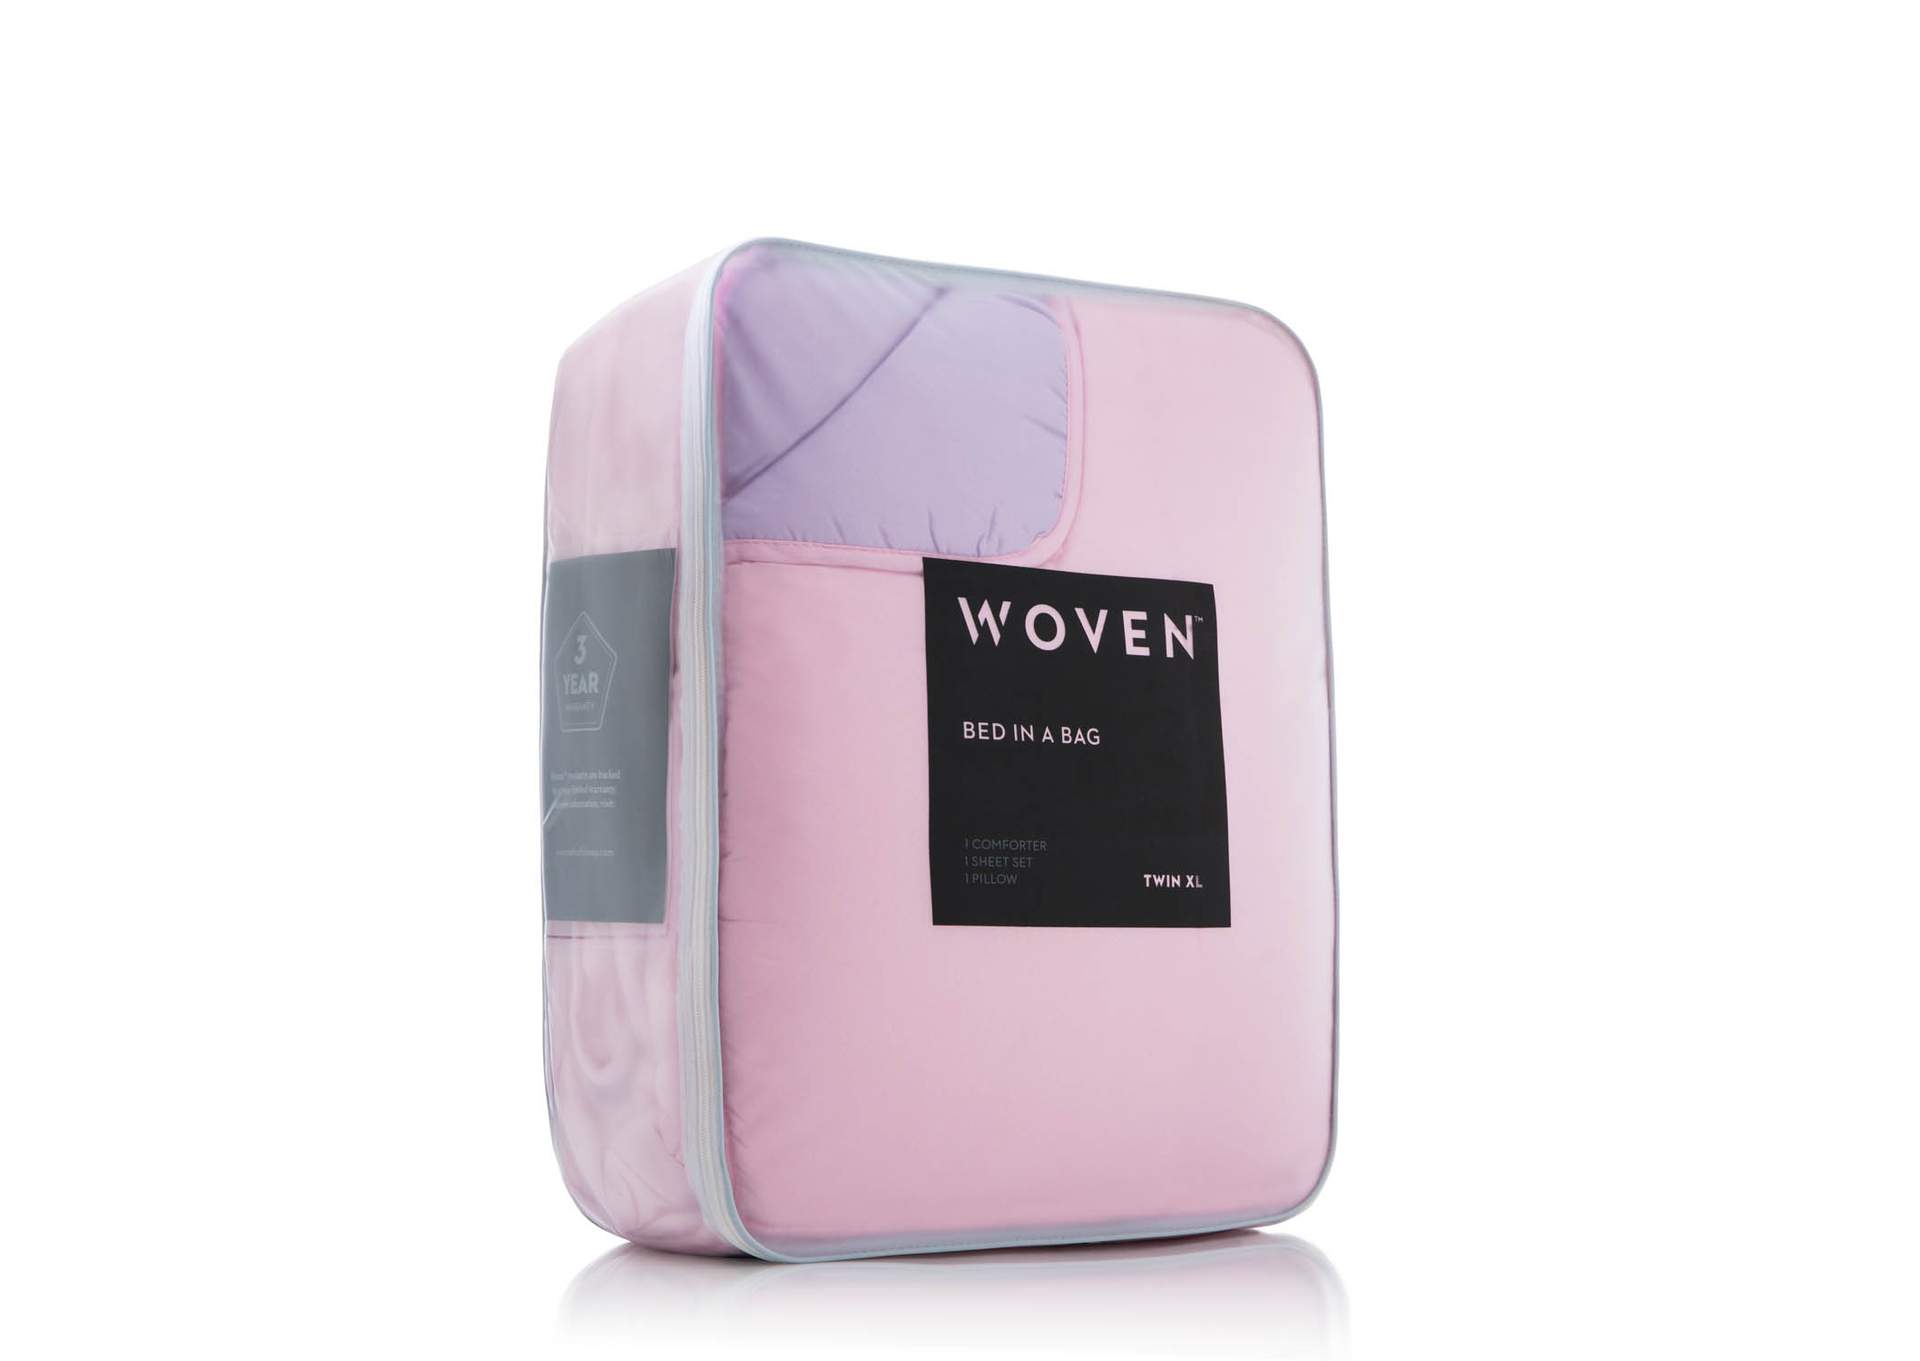 Malouf Lilac/Blush Bed in a Bag Reversible Comforters & Duvets - California King Size,Malouf